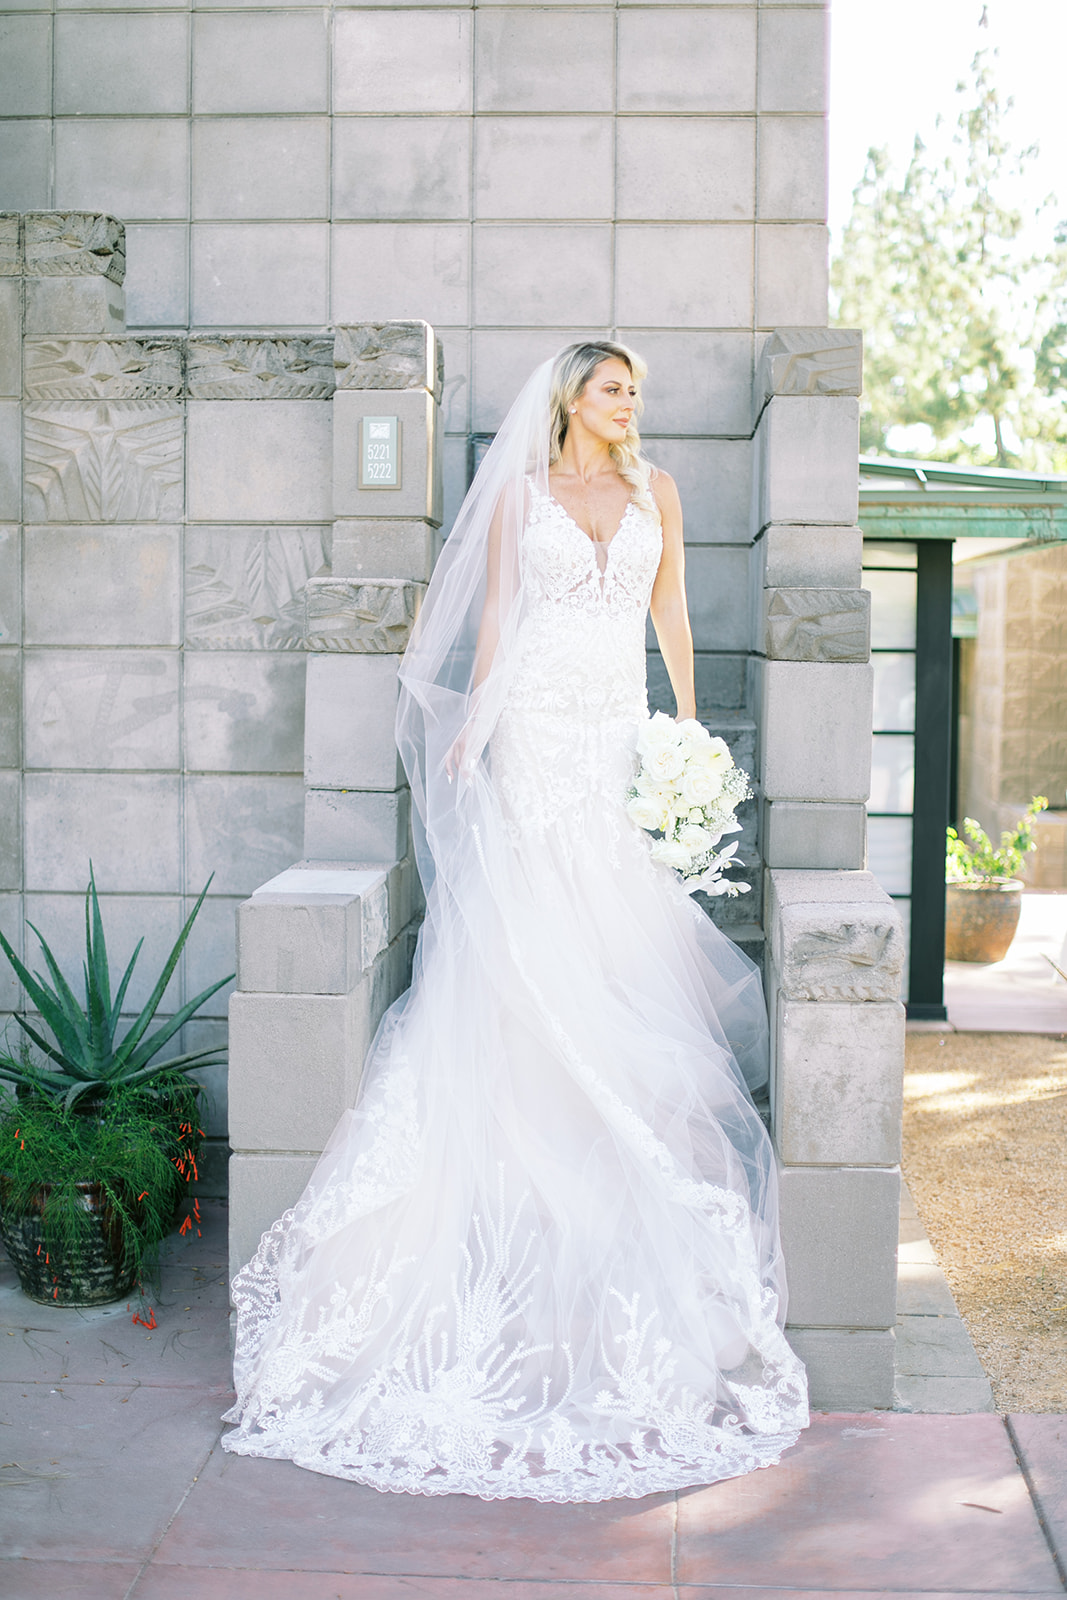 Bride standing on stairs of gray building holding out veil and bouquet, looking to side.